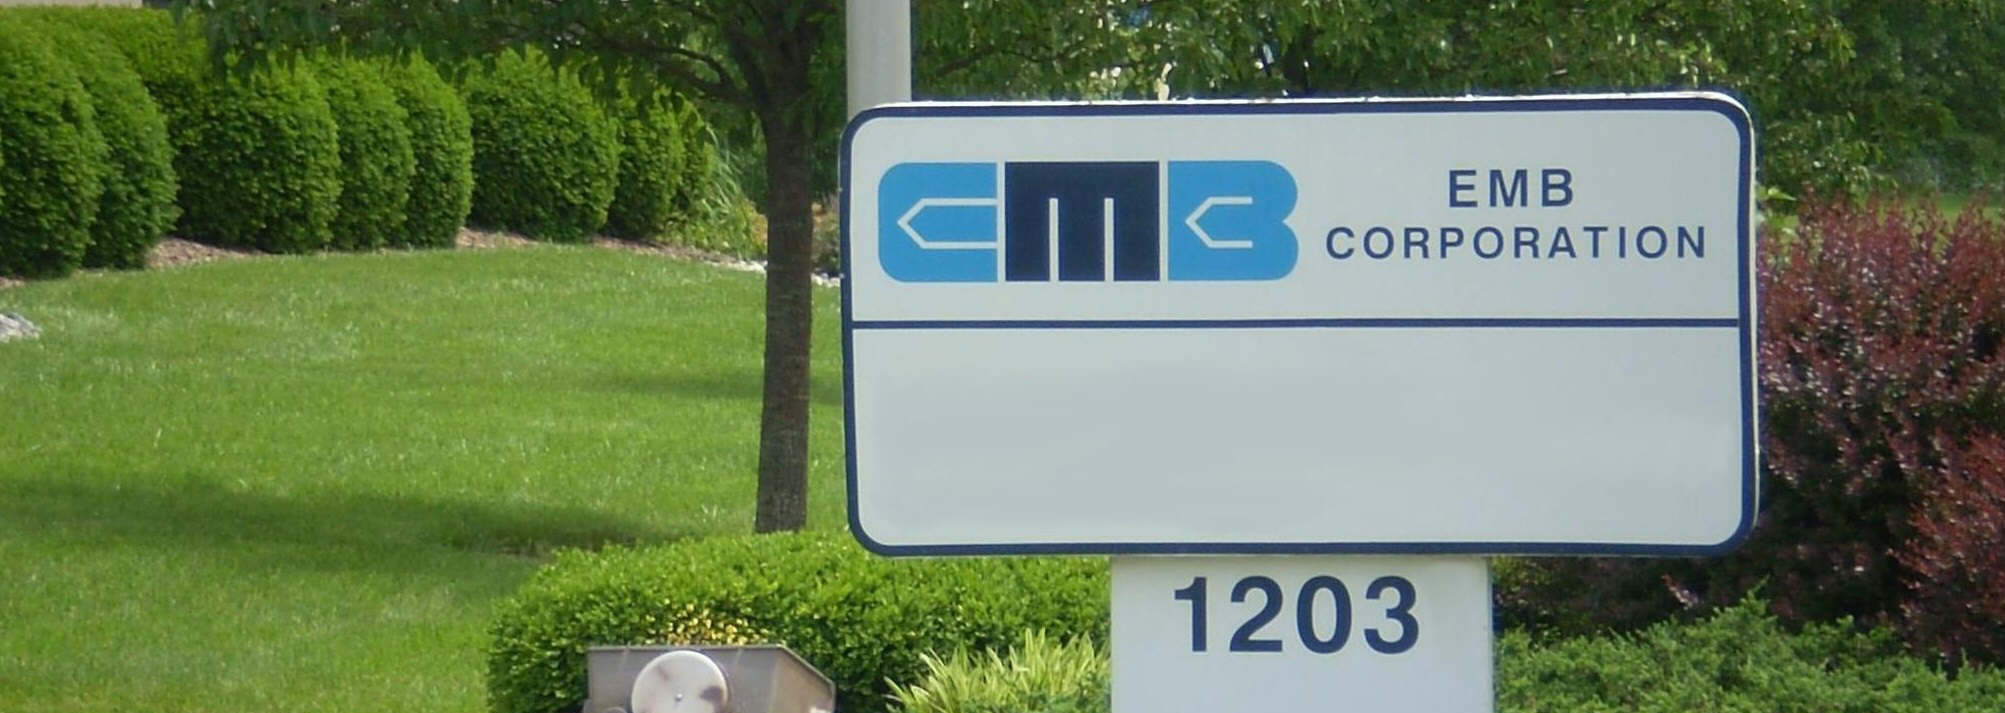 EMB Corp Sign